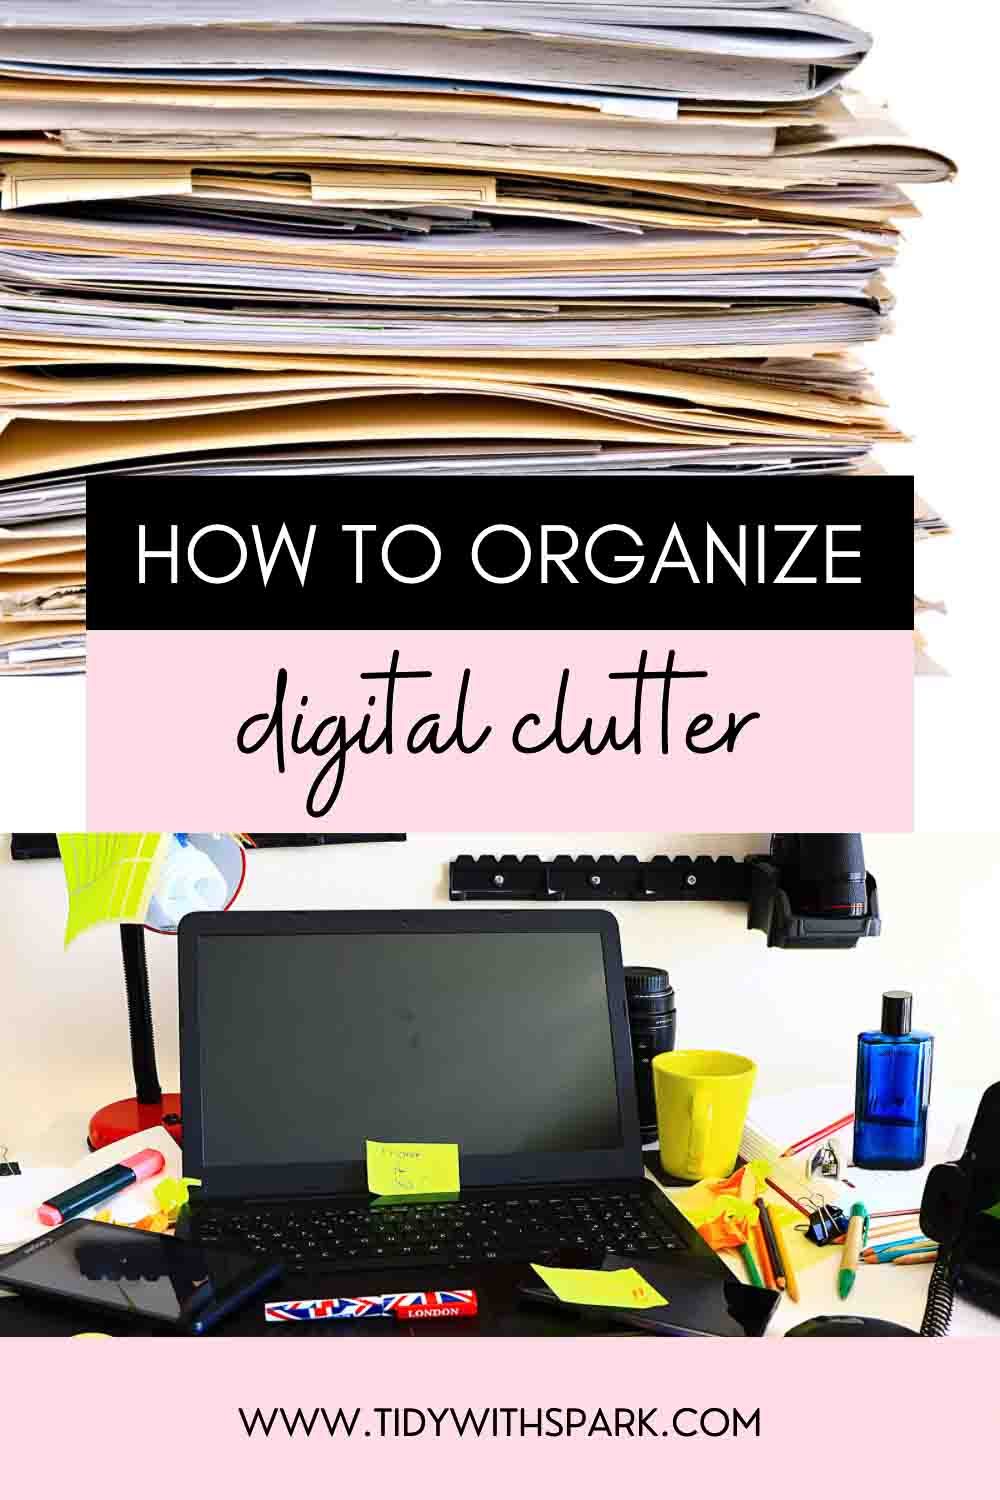 Promotional image for Digital Decluttering Tips for tidy with spark blog